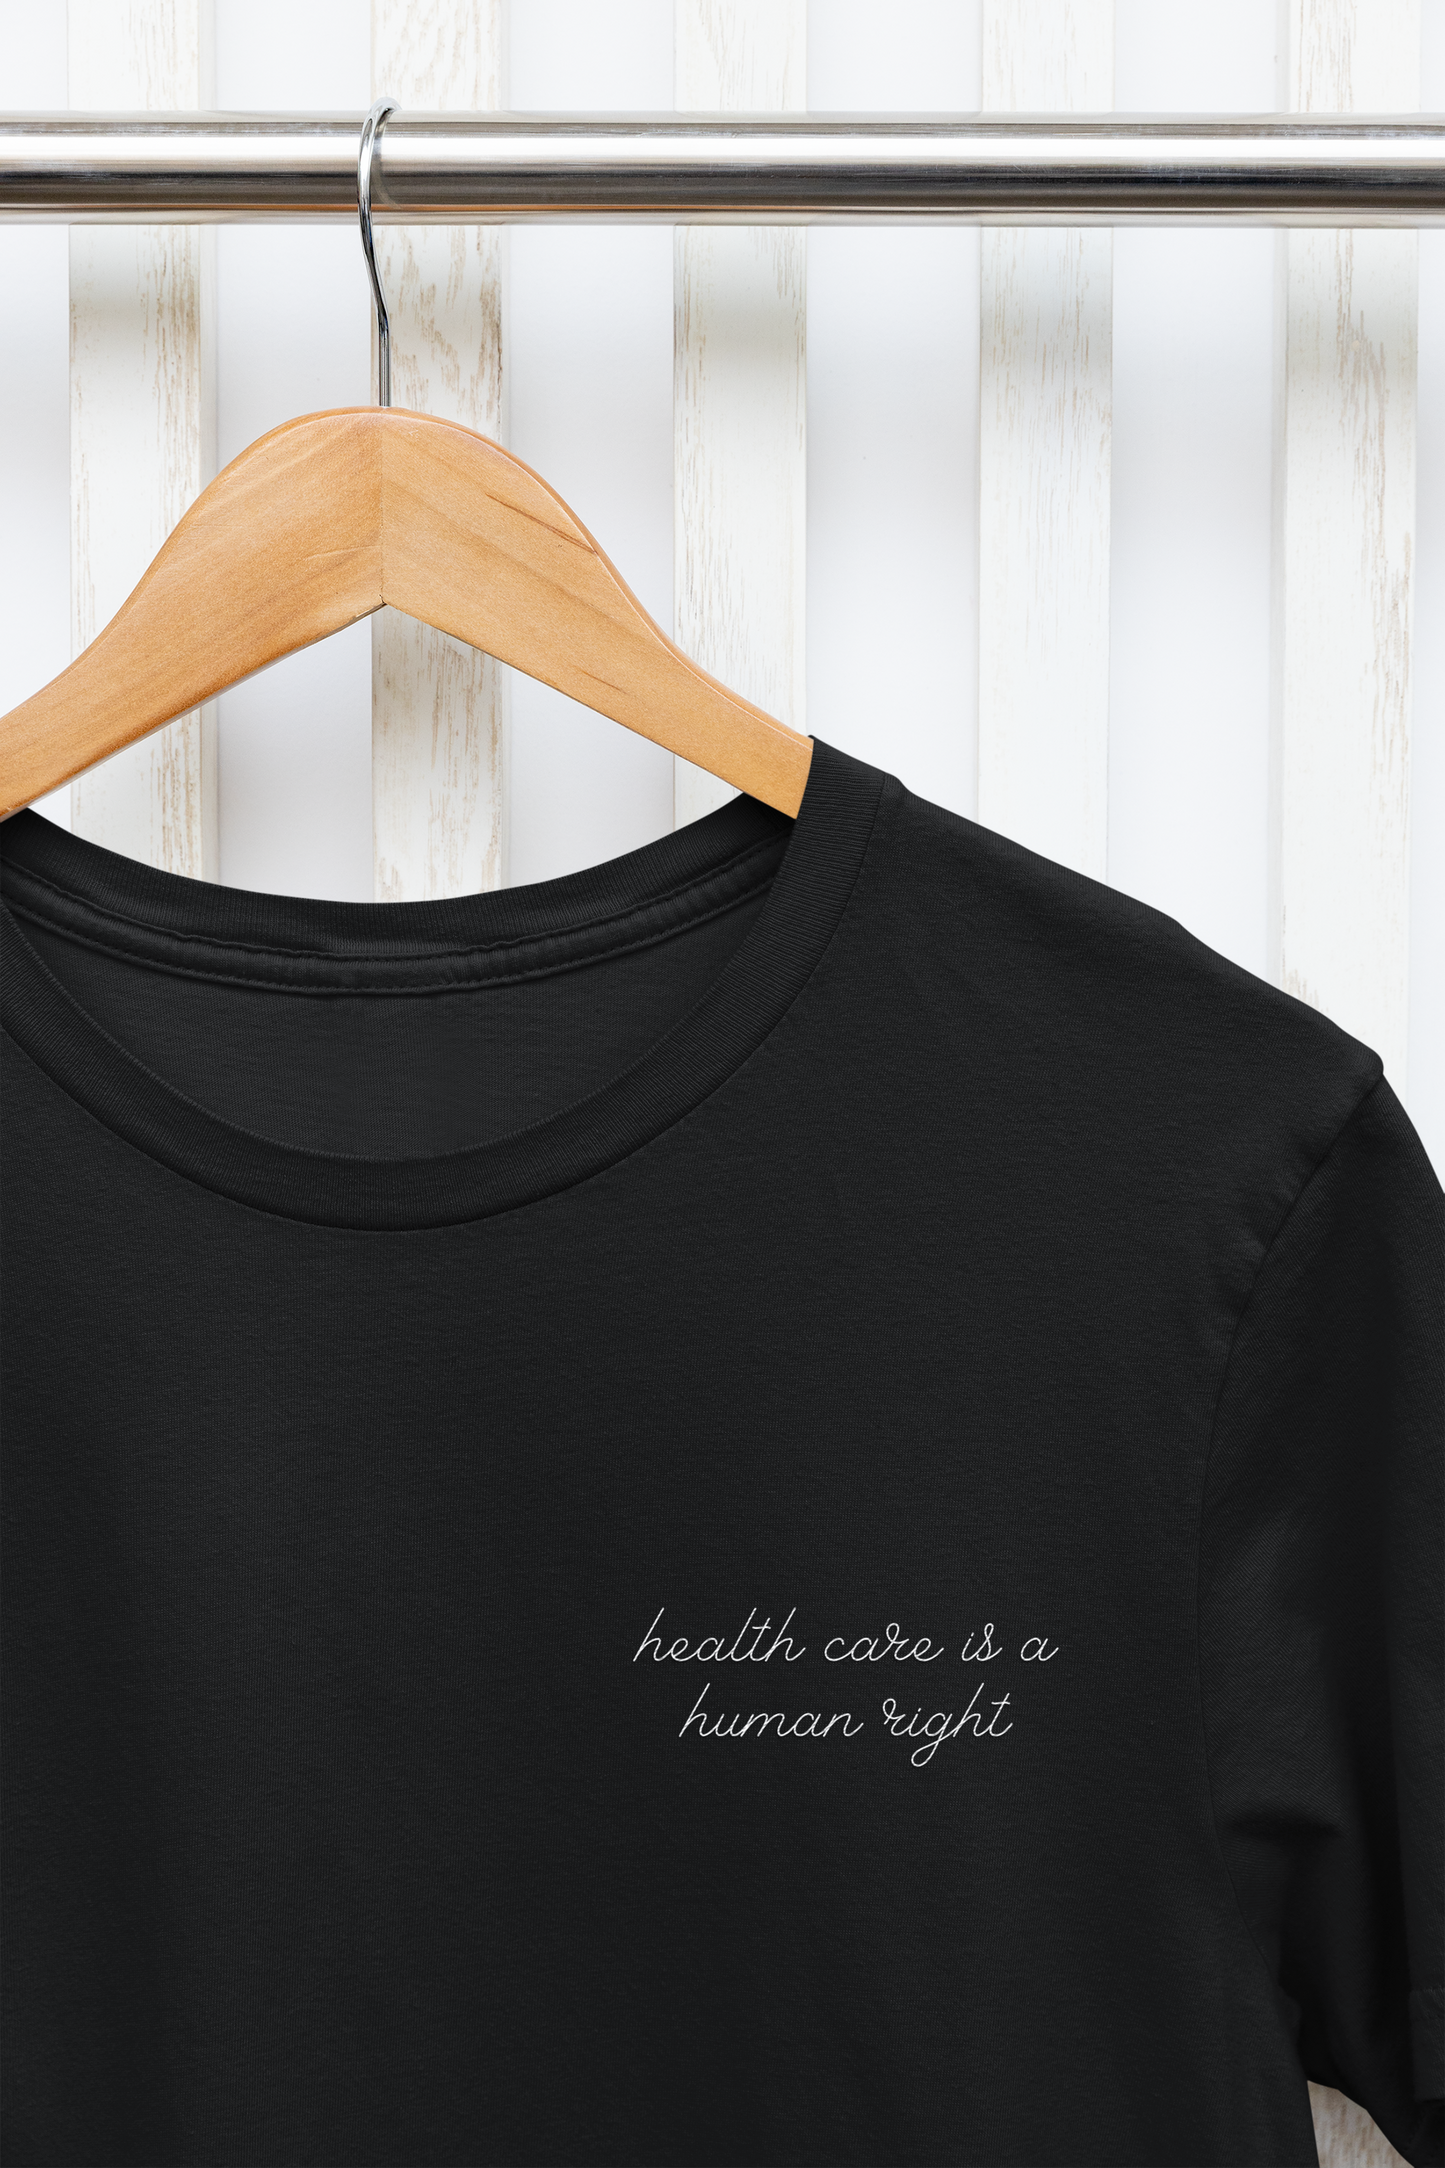 health care is a human right embroidered t-shirt